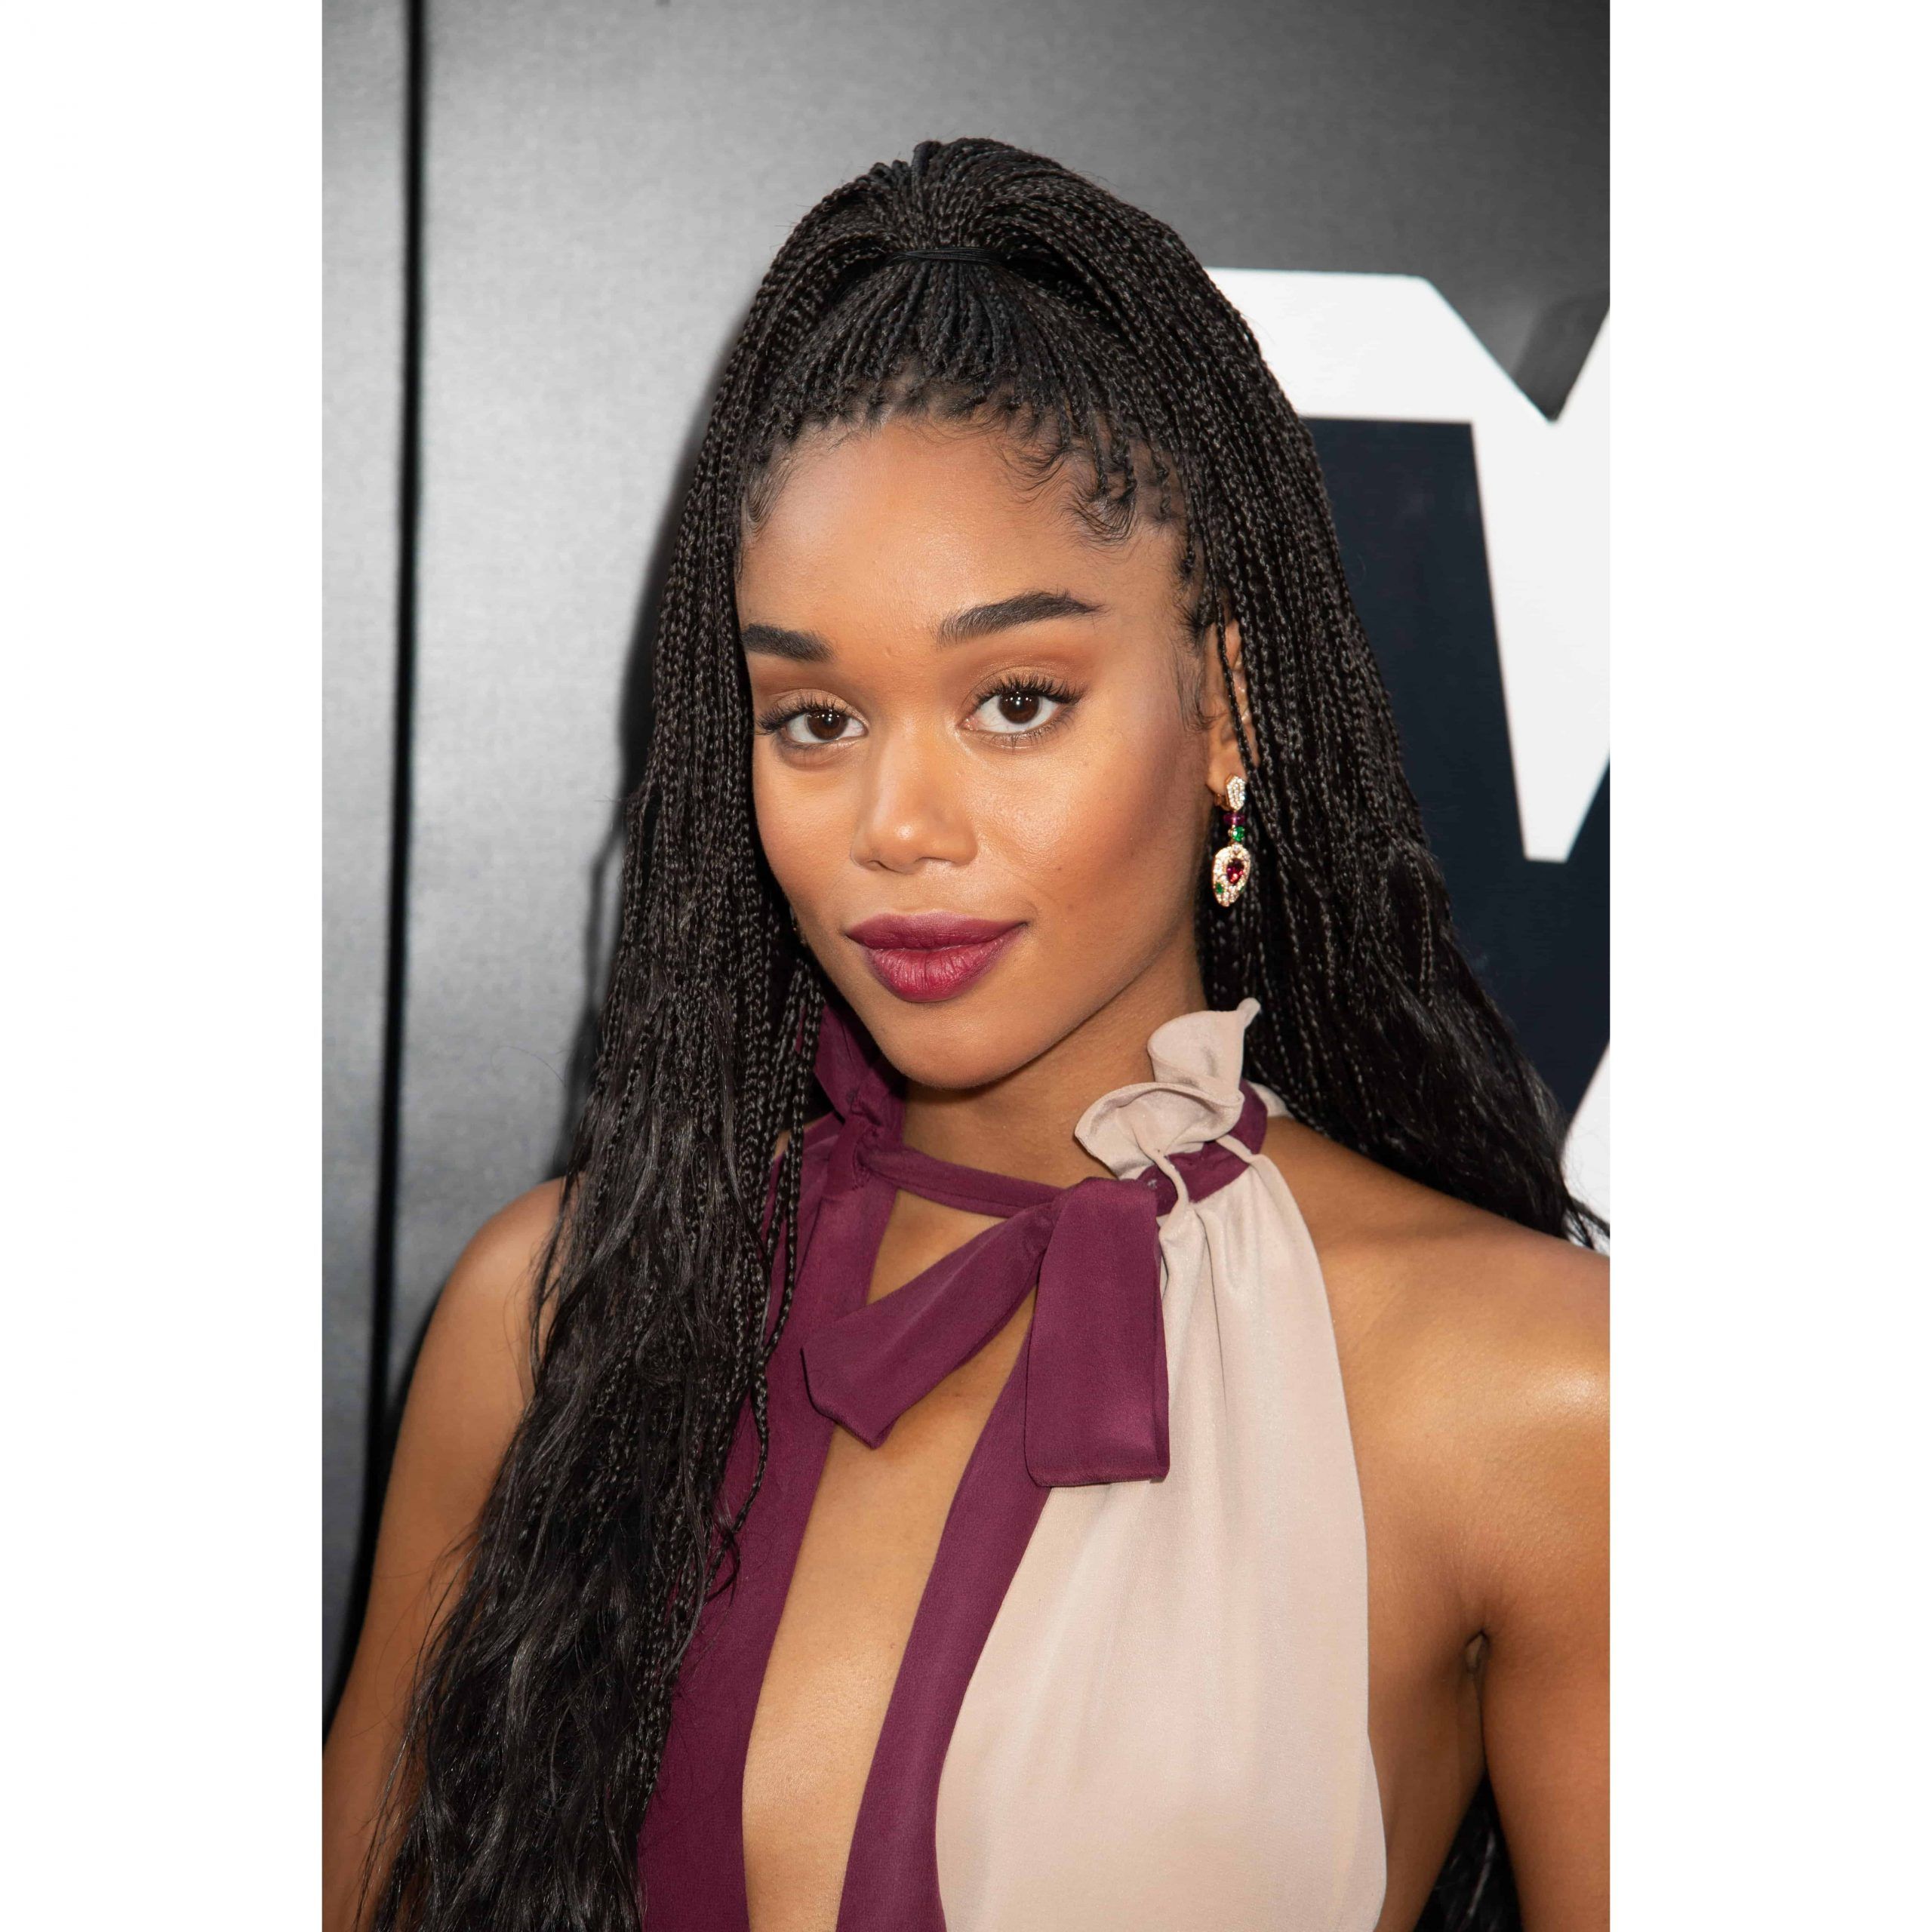 30 Black Braided Hairstyles You Can Try For A Fancy Pertaining To Current Loose Double Braids Hairstyles (View 16 of 20)